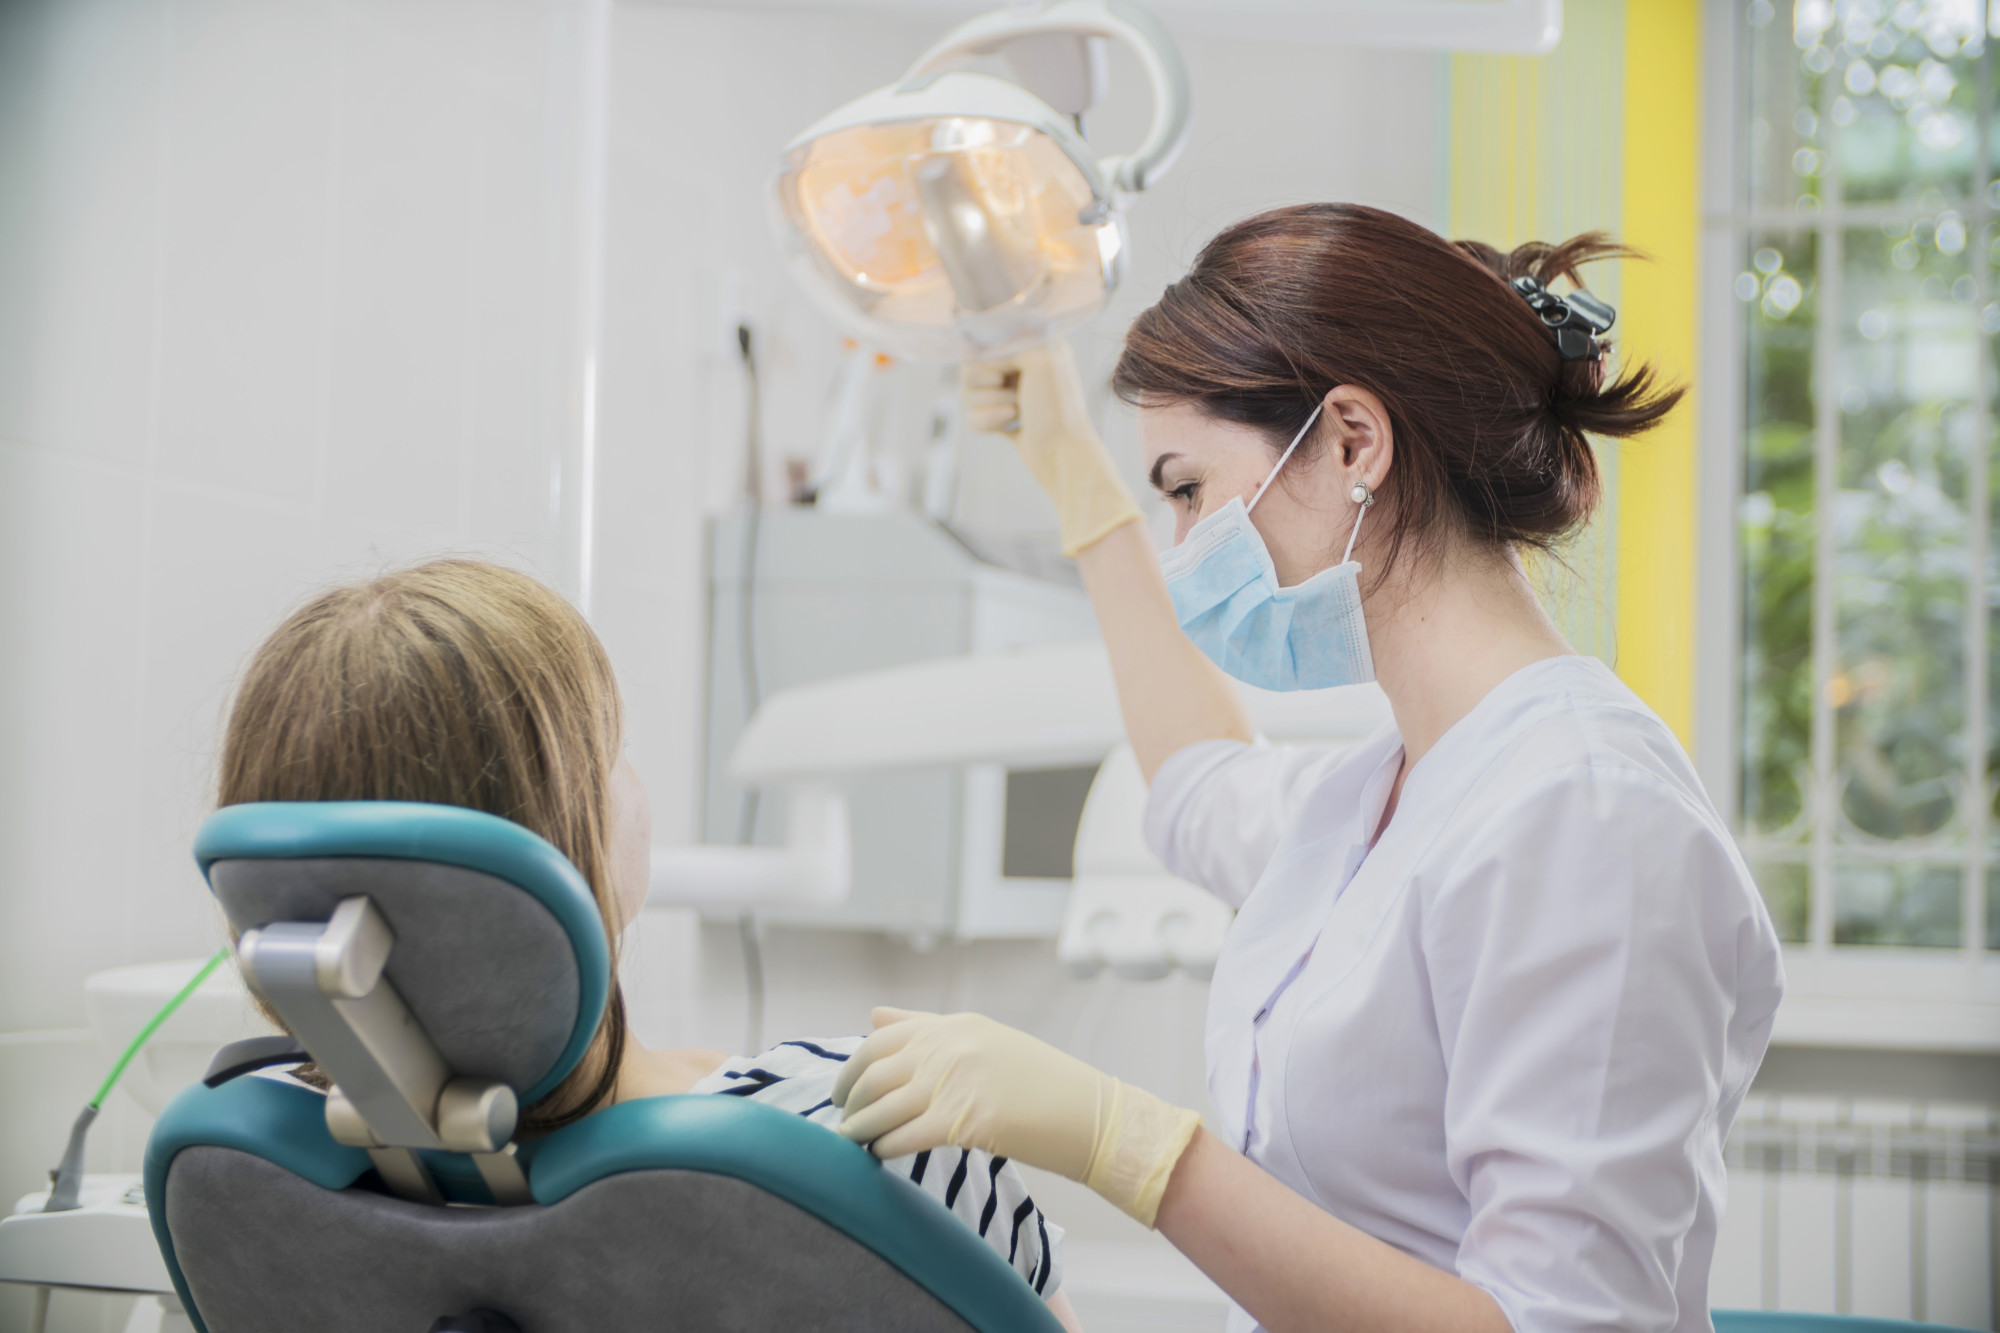 Here Are 3 Root Canal Recovery Tips to Help You After Getting One